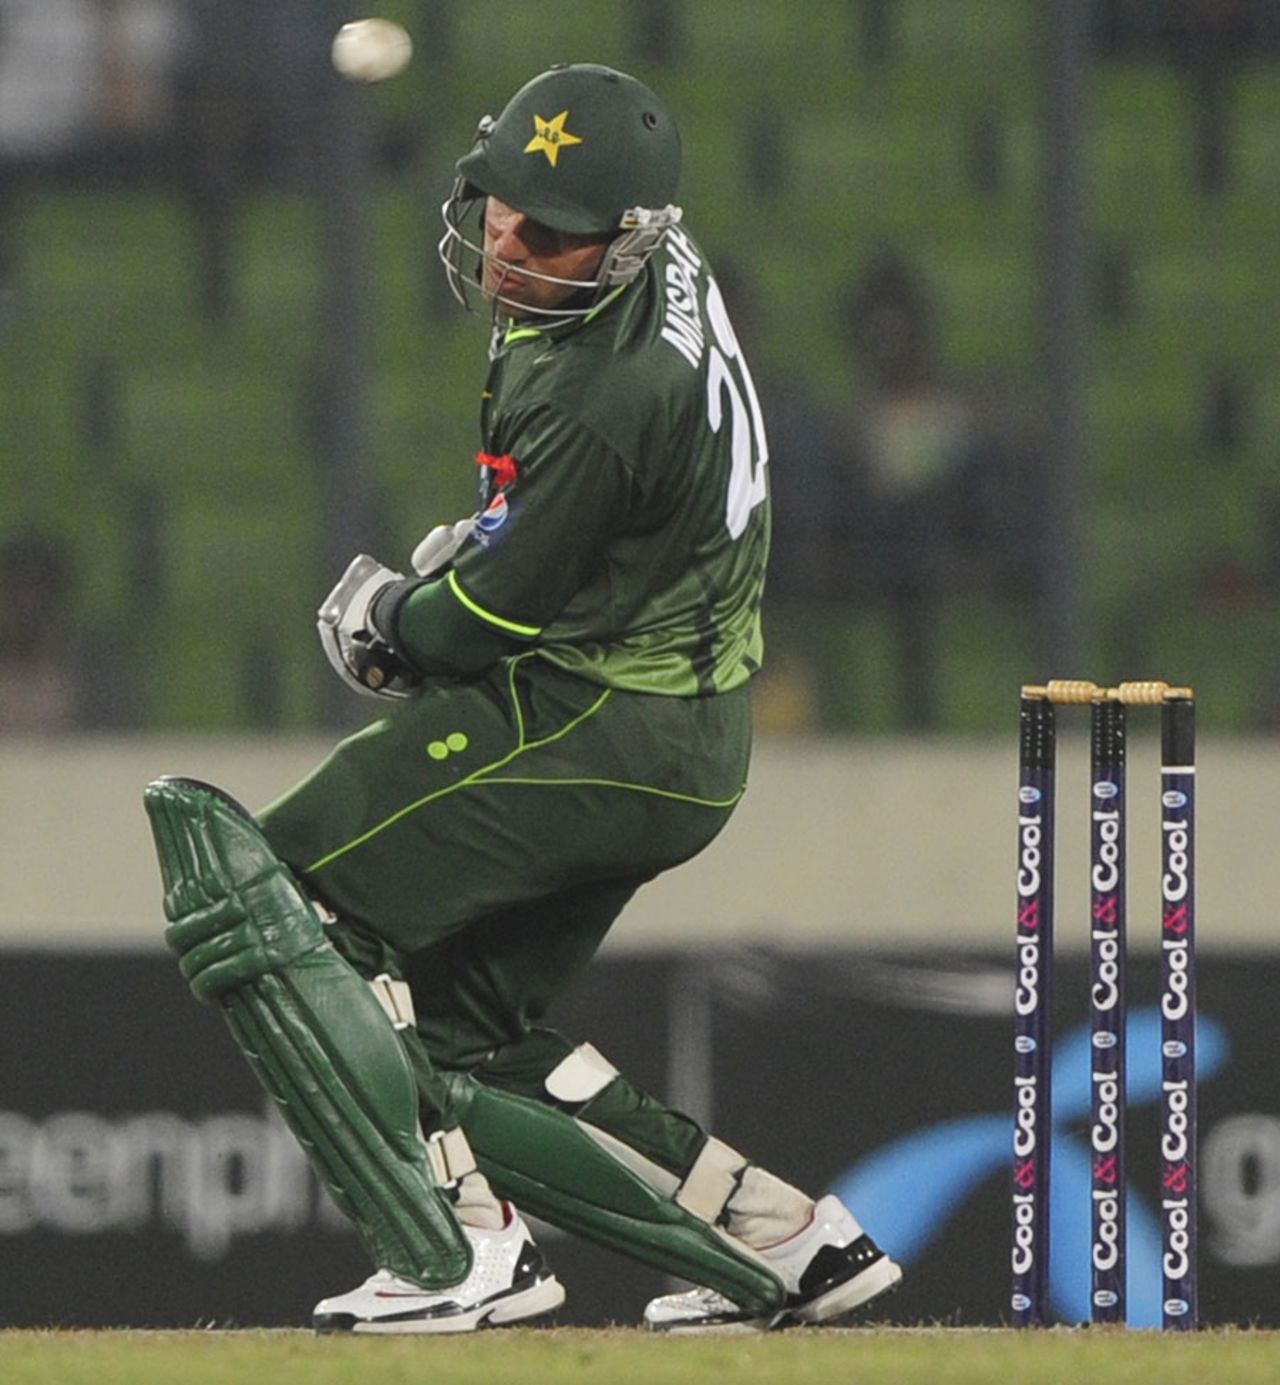 Misbah-ul-Haq weaves out of the way of a short ball, Bangladesh v Pakistan, 1st ODI, Mirpur, December 1, 2011